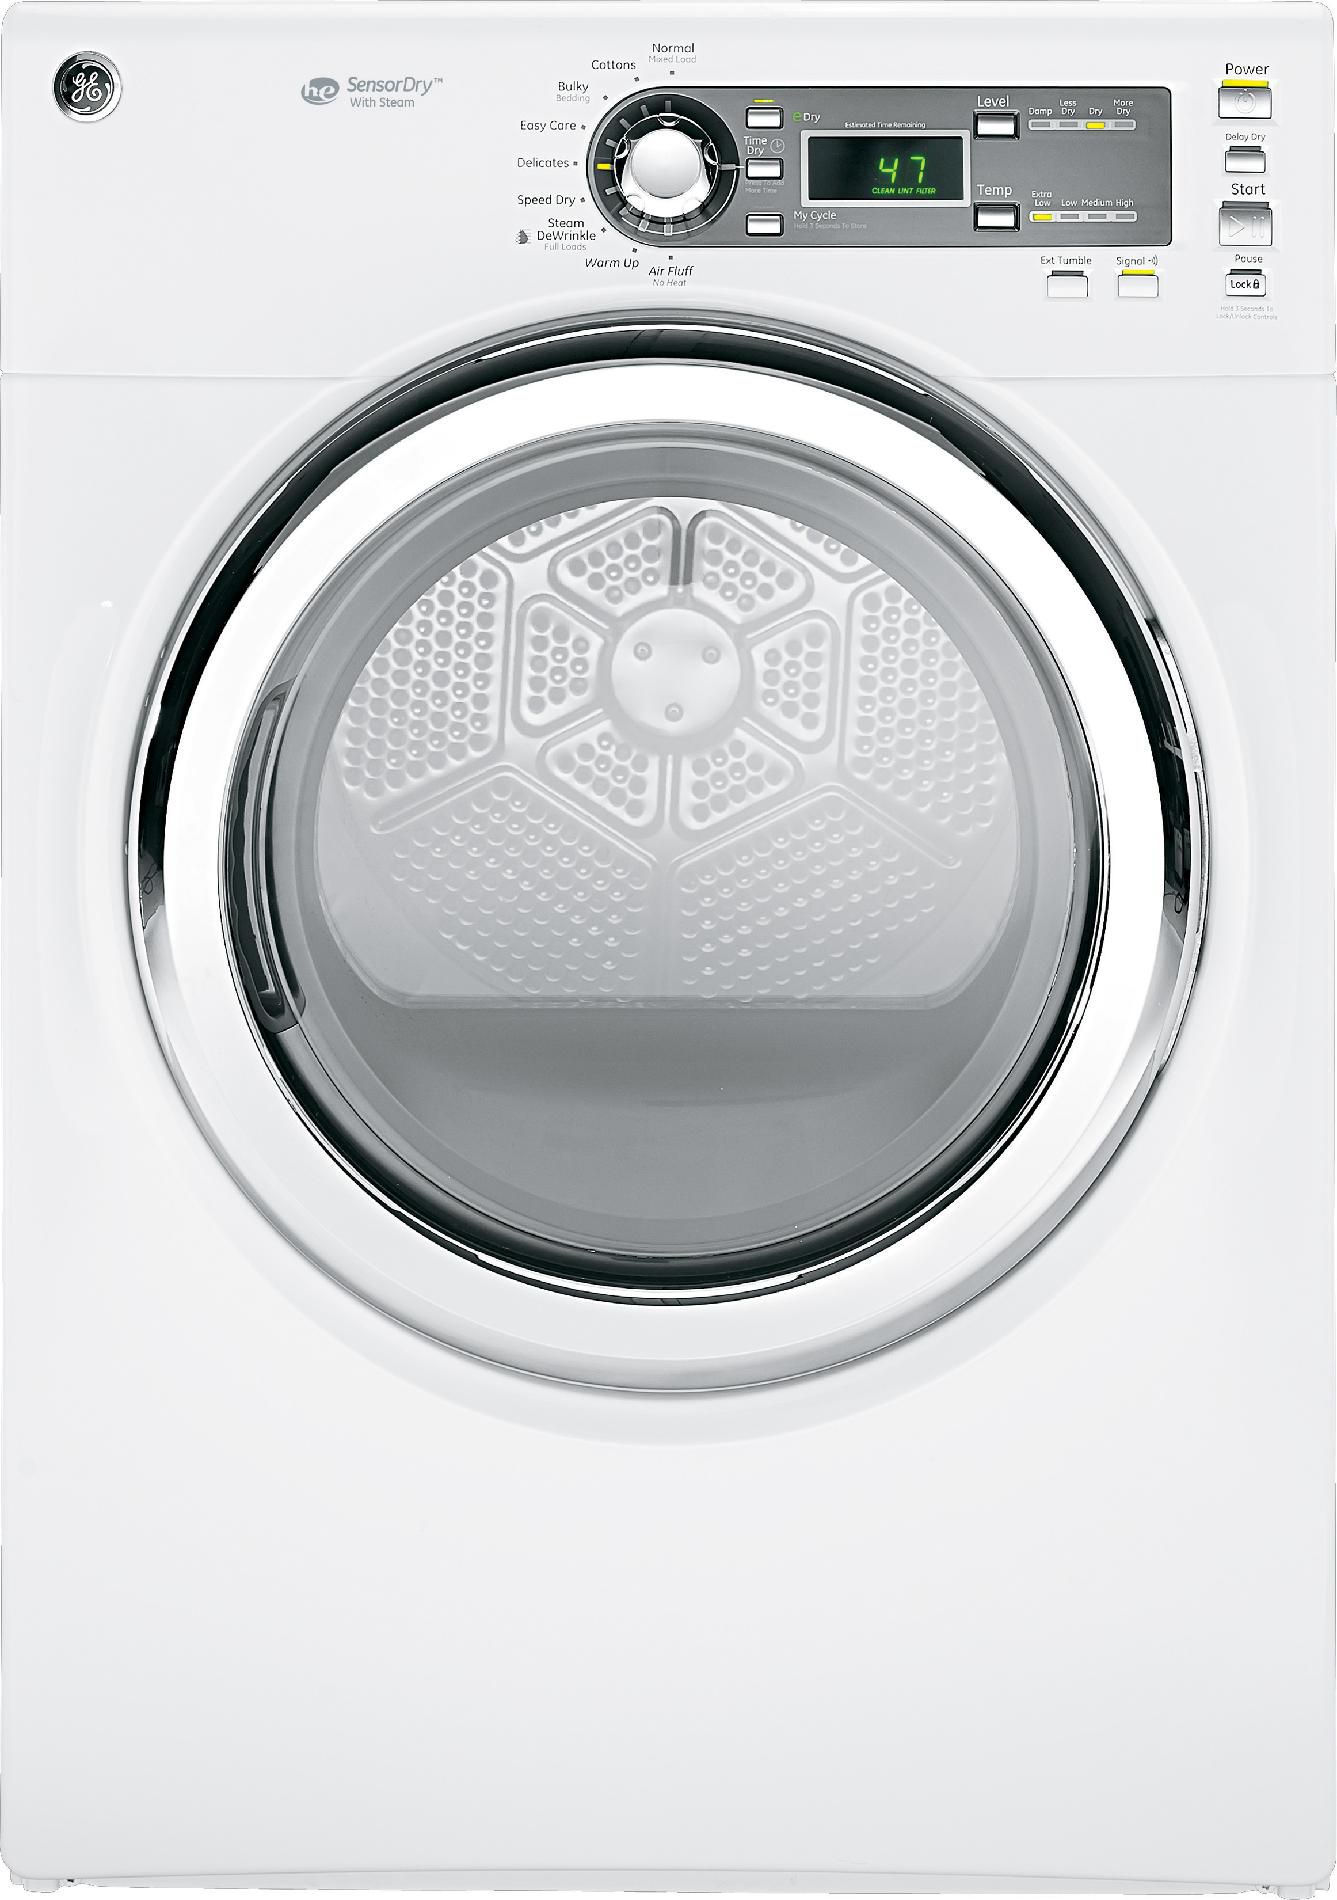 GE 7.5 cu. ft. Steam Electric Dryer w/ Stainless Steel Drum - White 7.0 cu. ft. and greater